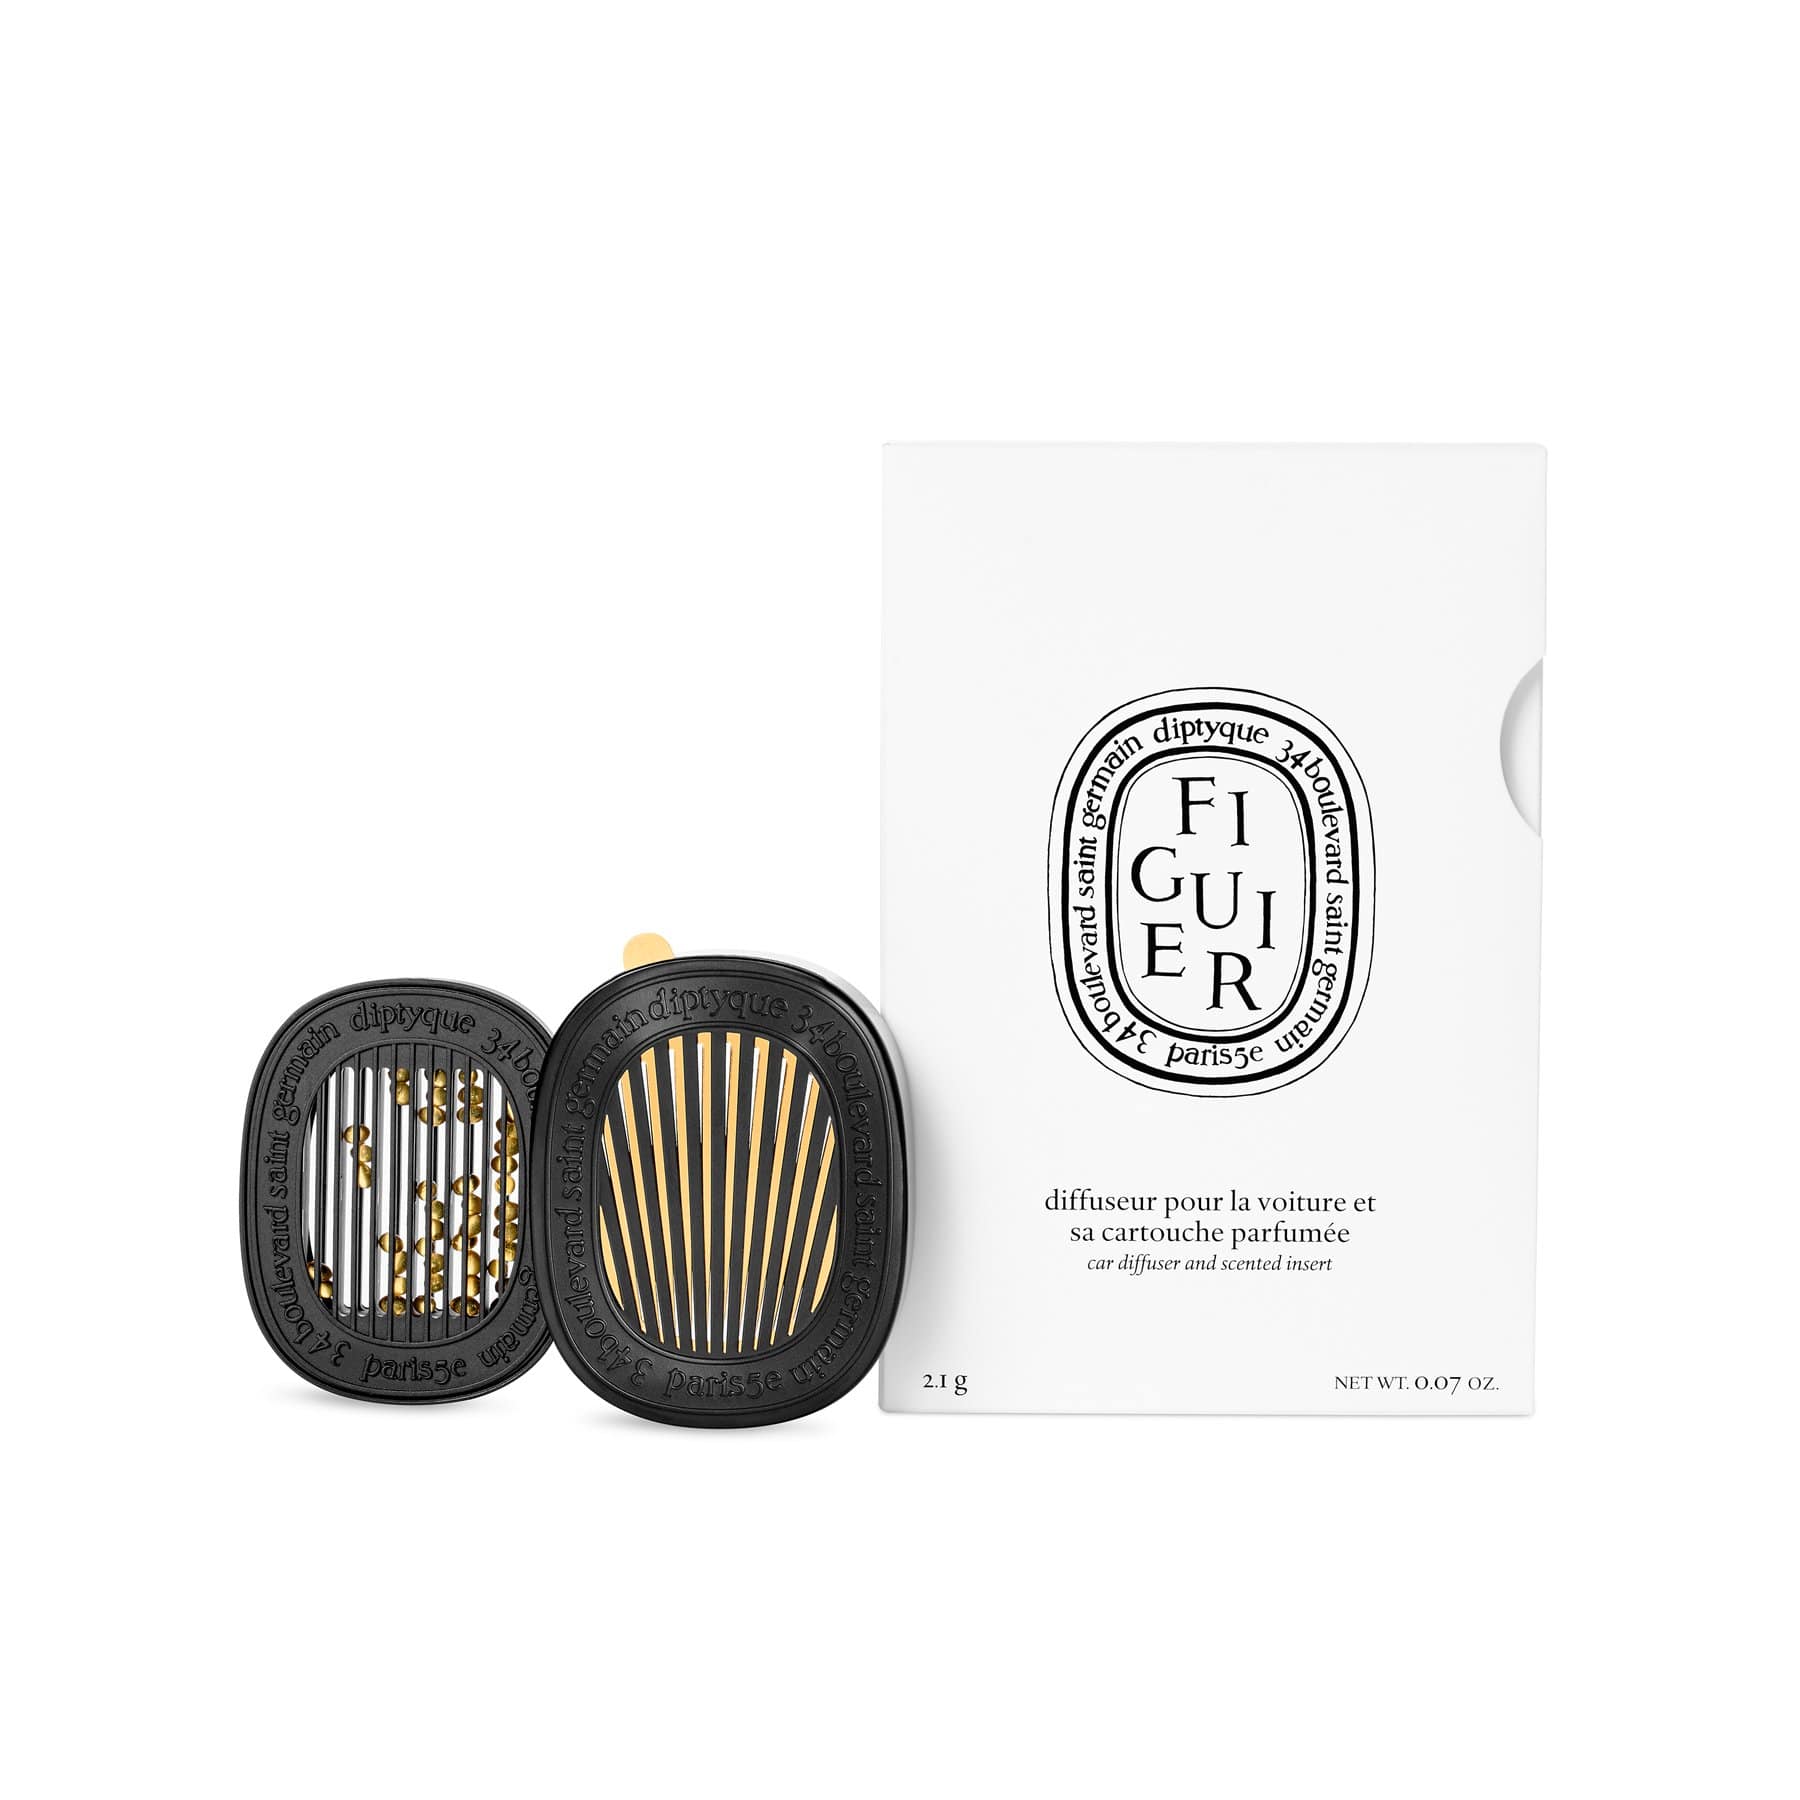 Diptyque car scent diffuser and 1 refill Car Diffuser by Figuier